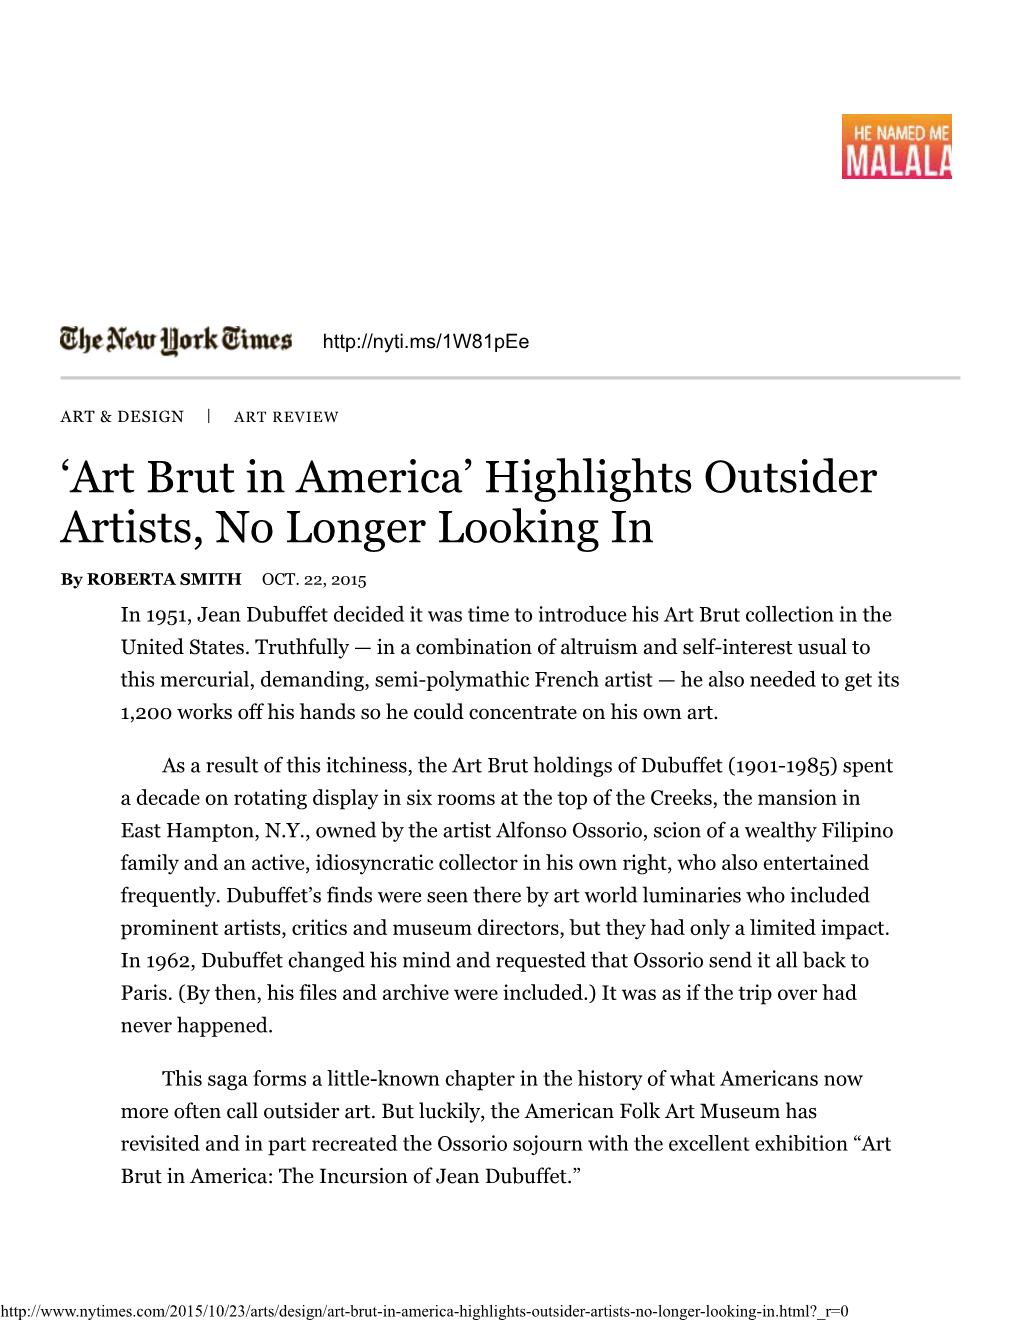 'Art Brut in America' Highlights Outsider Artists, No Longer Looking In